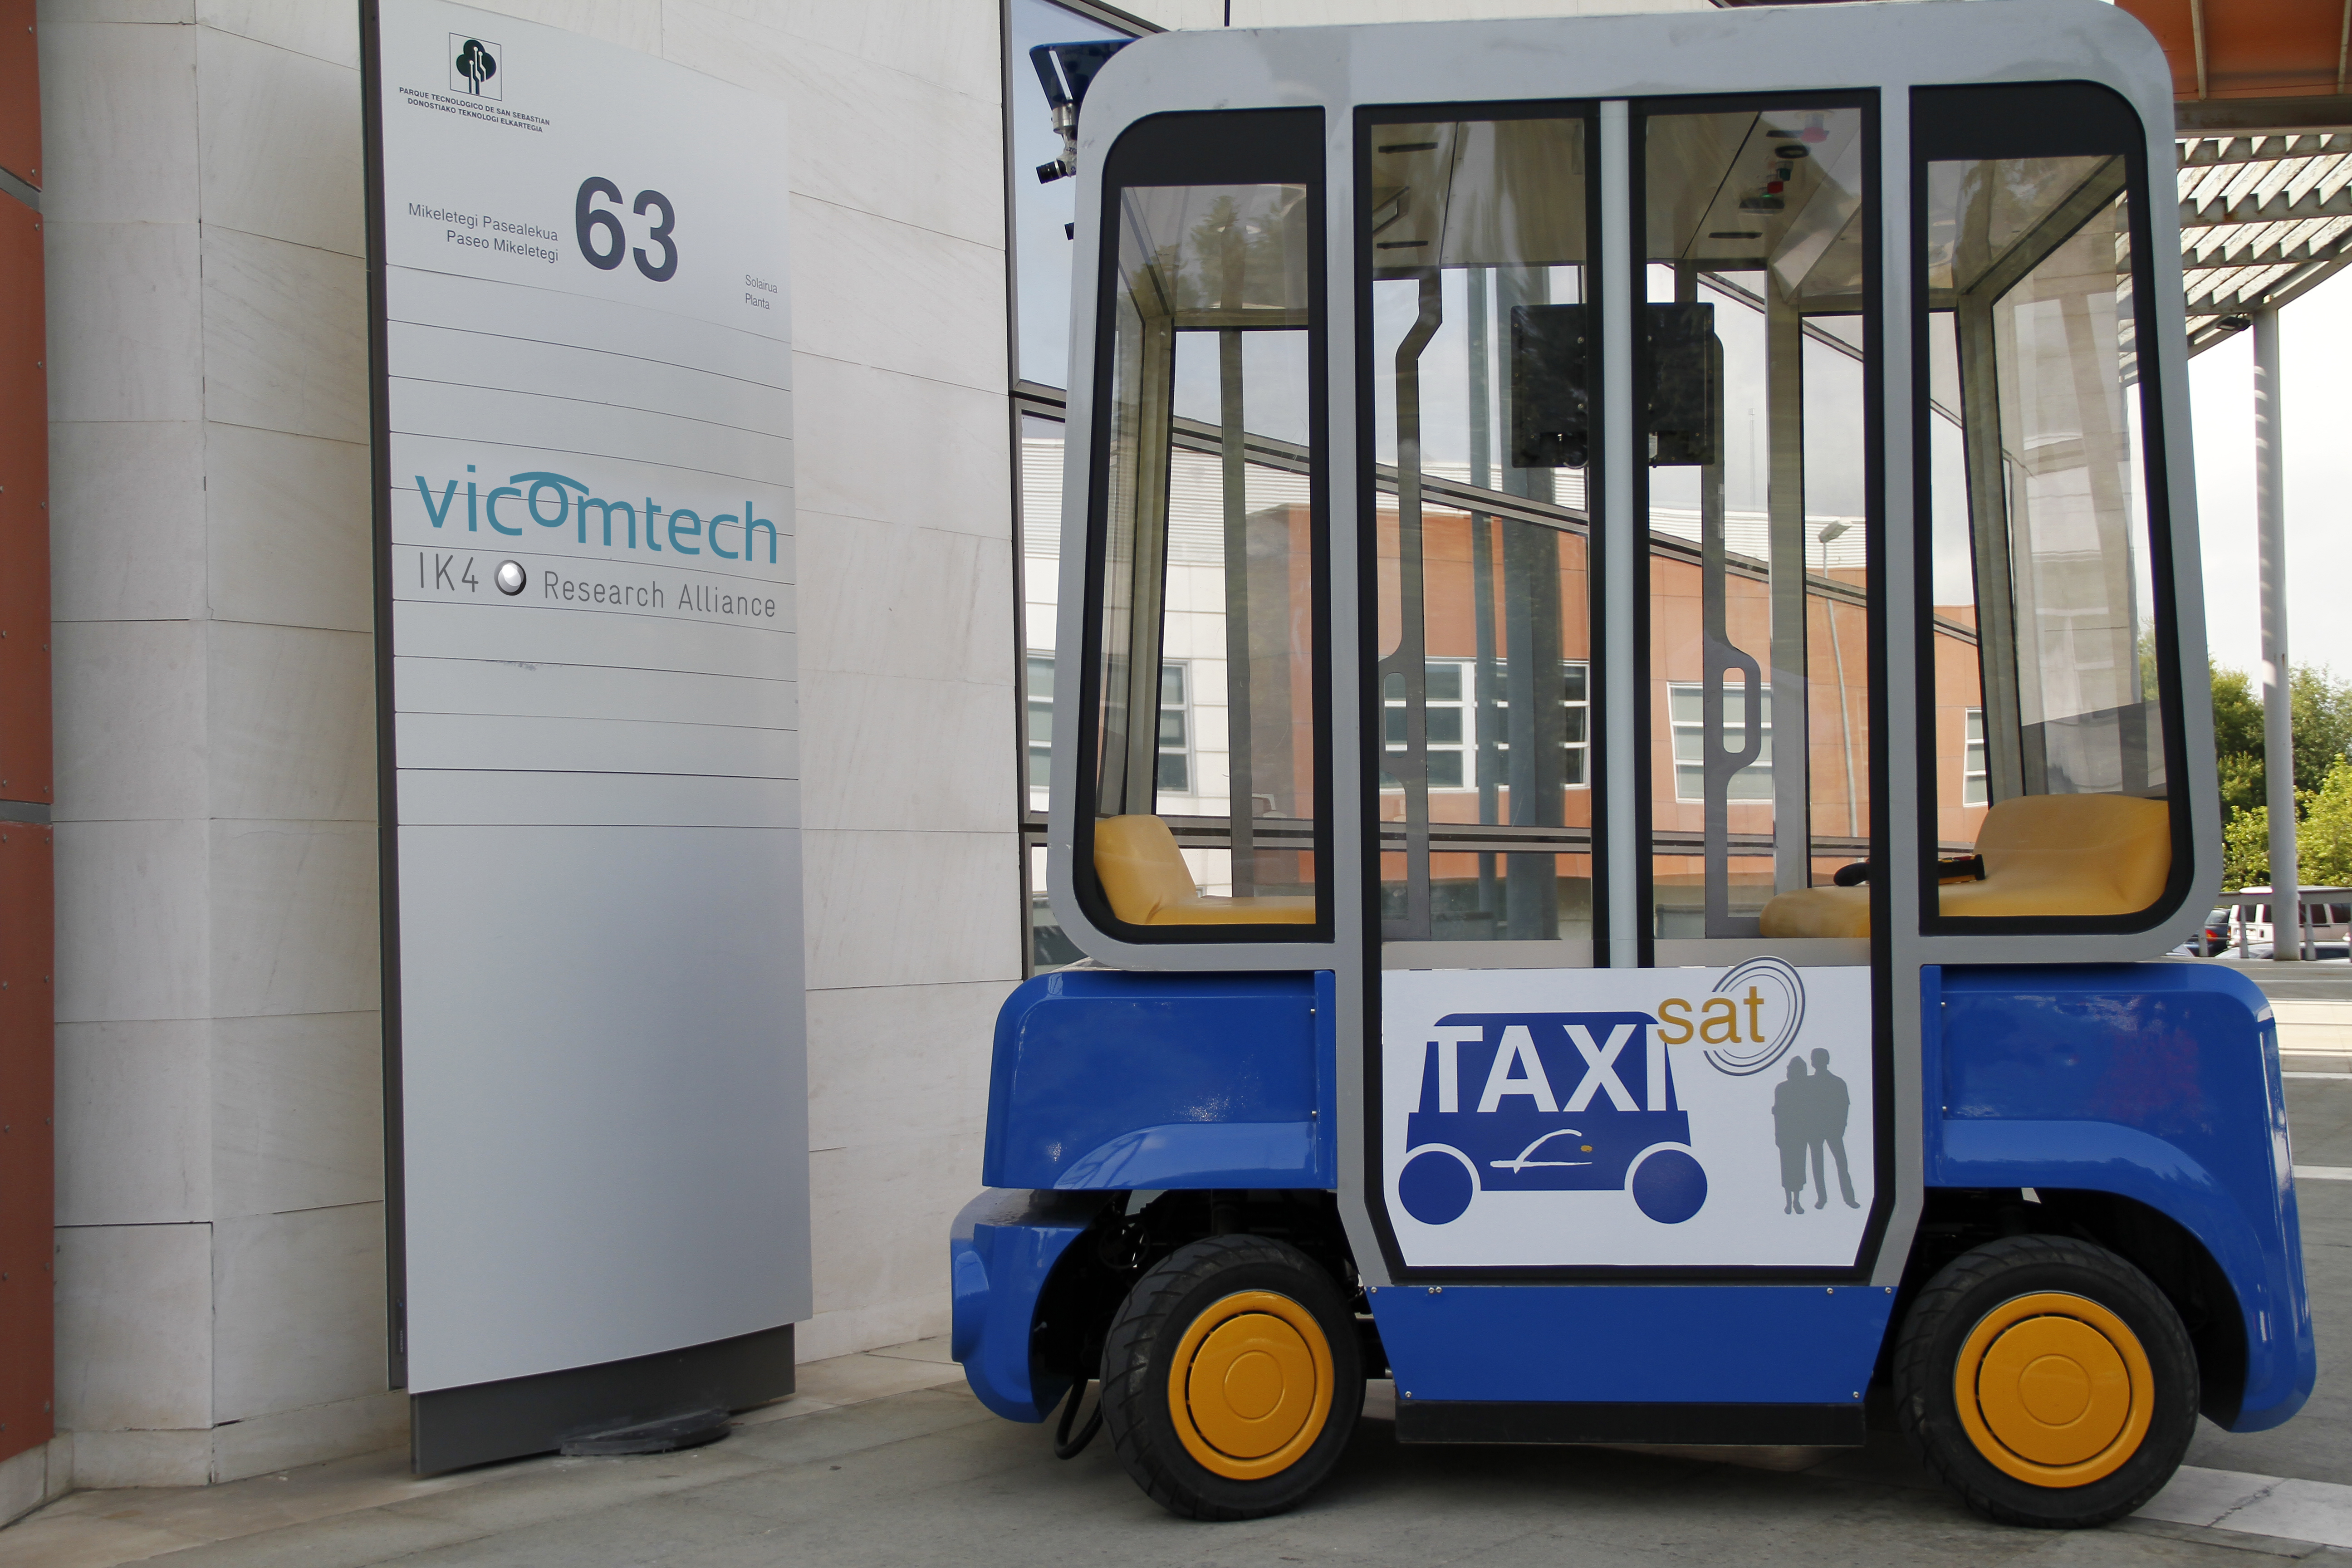 Taxisat demostration in European Space Solutions conference in Munich